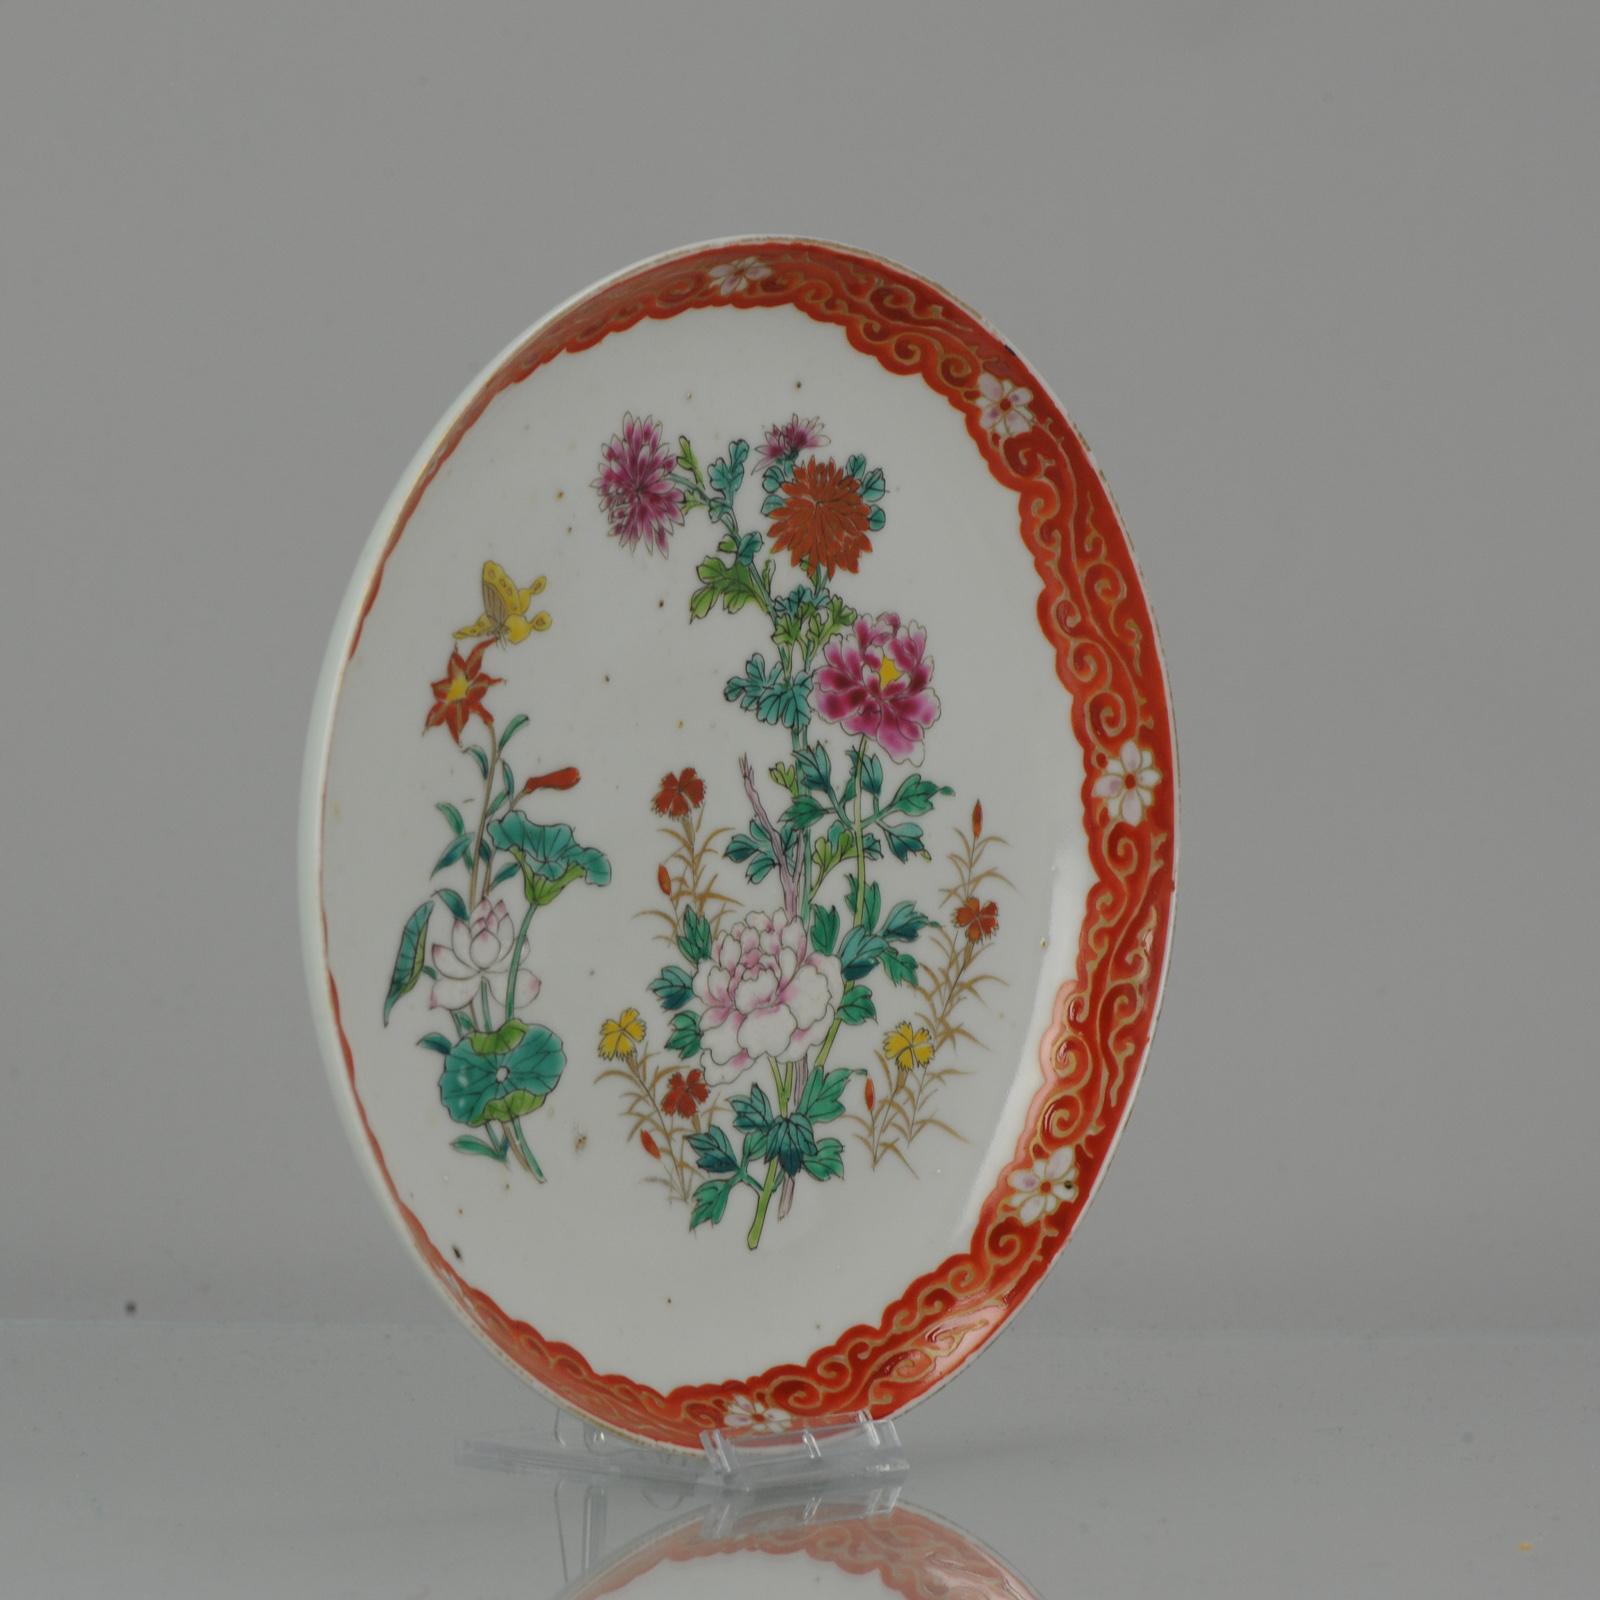 A very nicely decorated Japanese Porcelain dish in polychrome colors.

Marked at base with a 6 character overglaze mark, Hichozan Shinpo Zo.

The central scene is of a busy flower landscape with butterflies flying around. The rim nice copper red